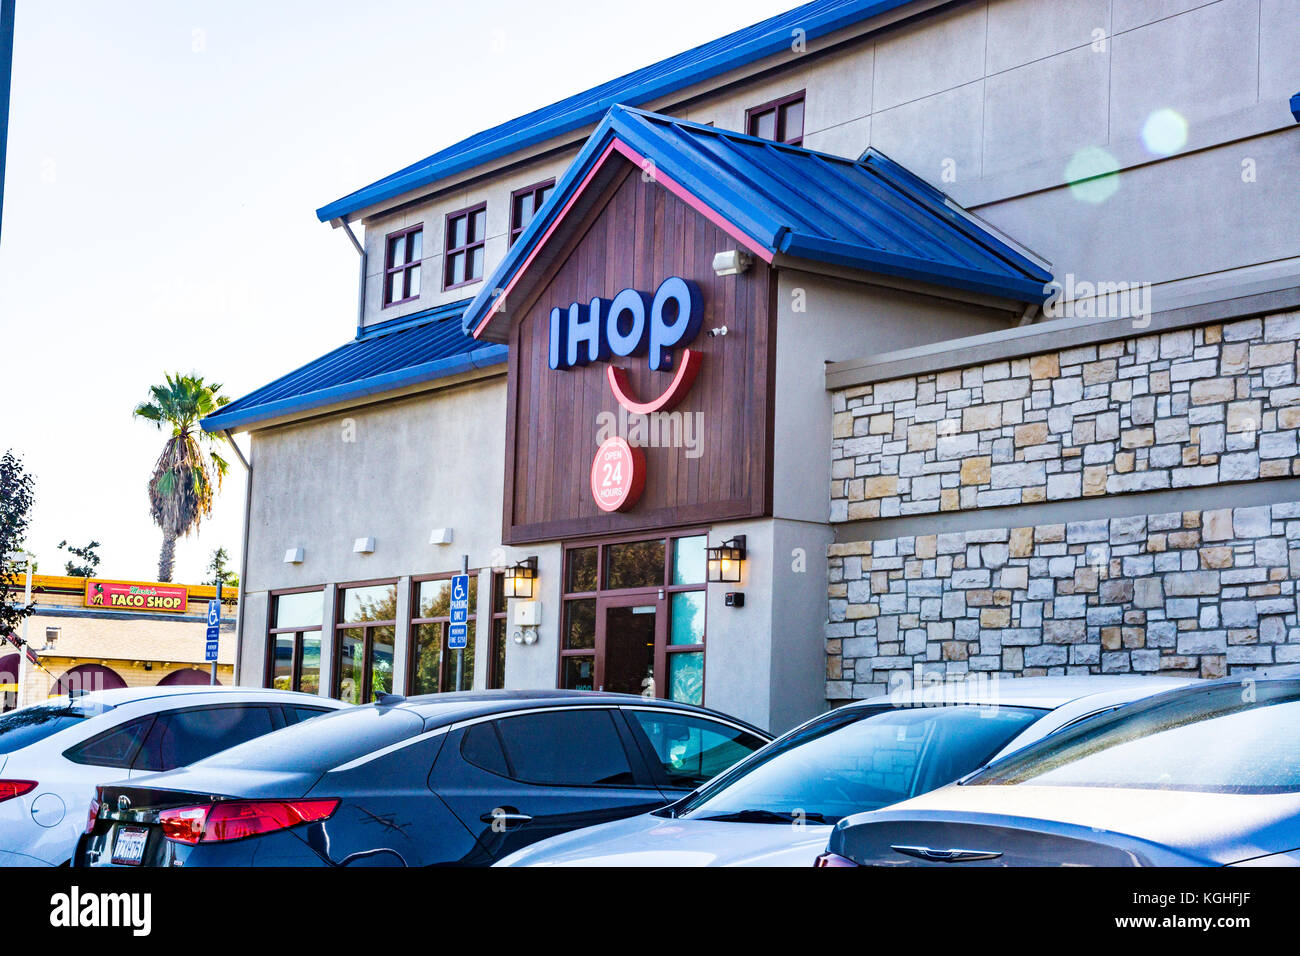 40+ Ihop Restaurant Stock Photos, Pictures & Royalty-Free Images